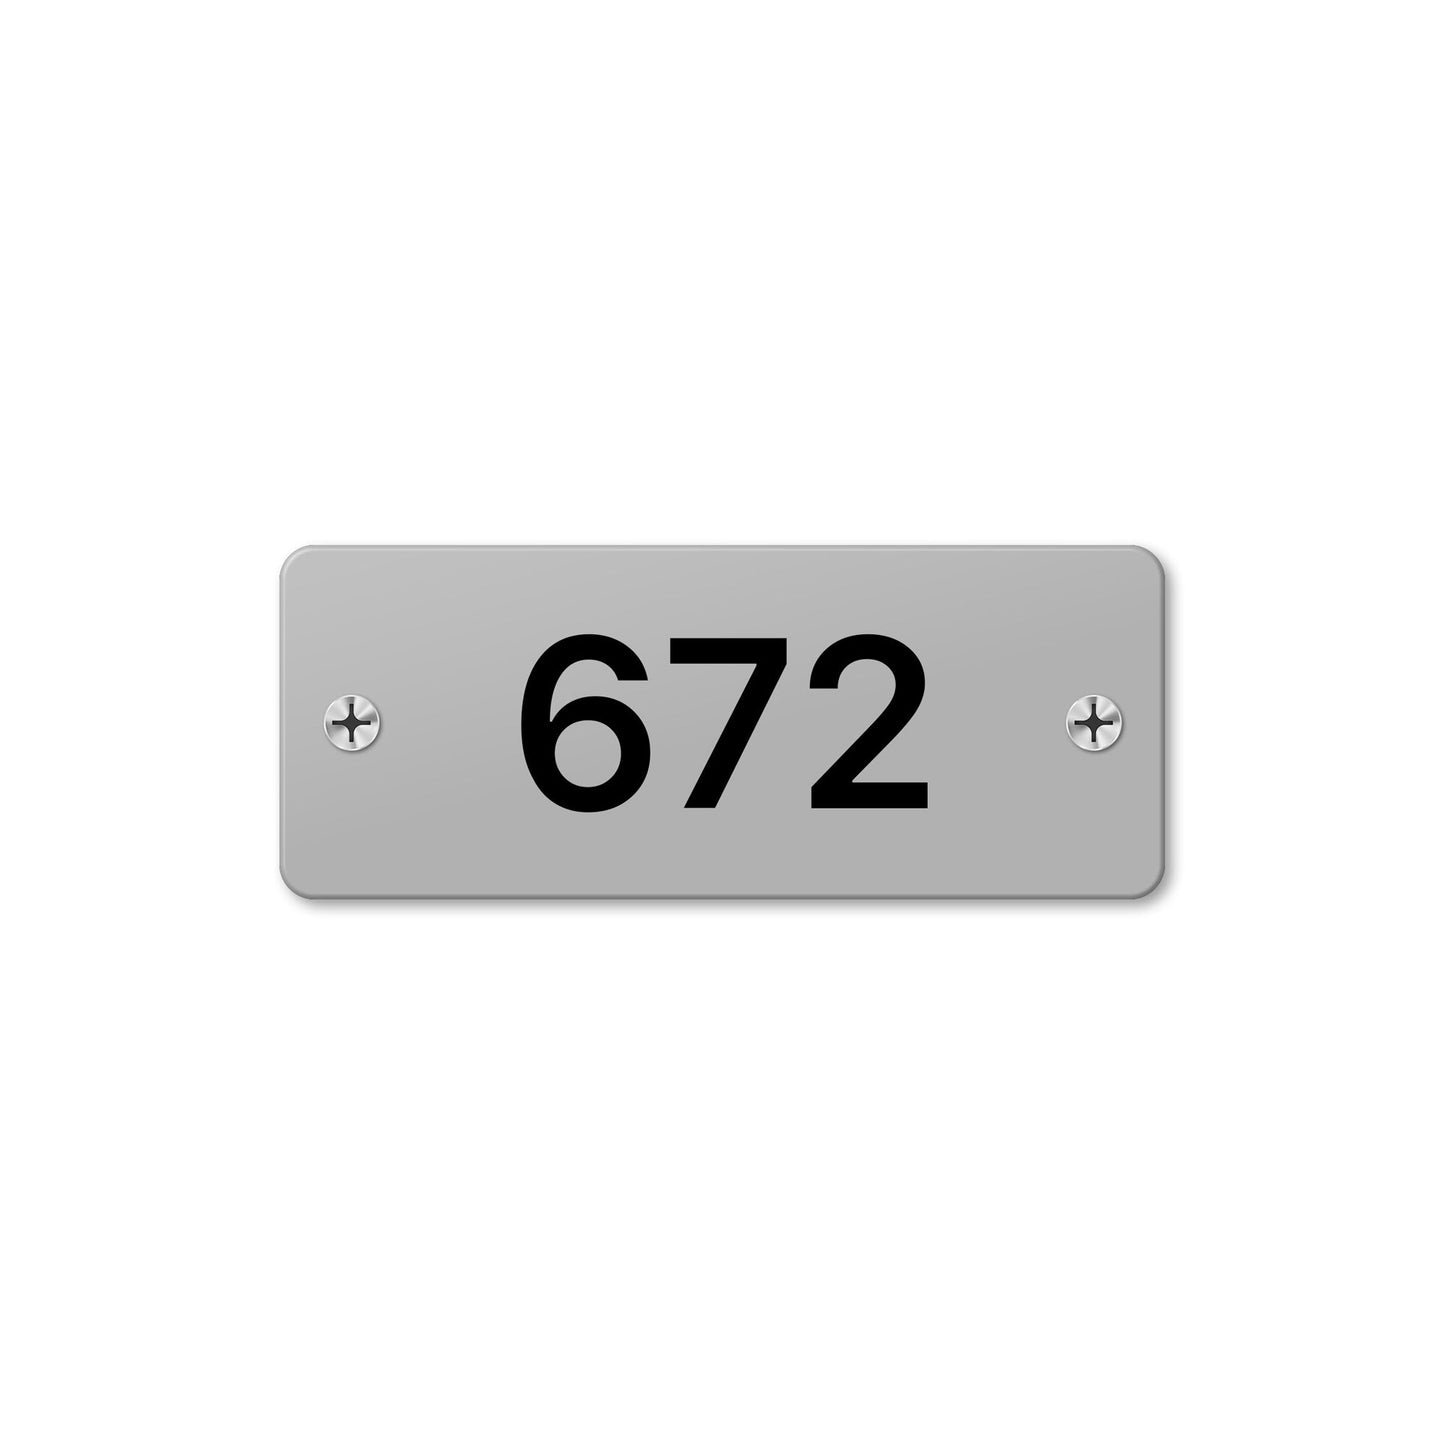 Numeral 672